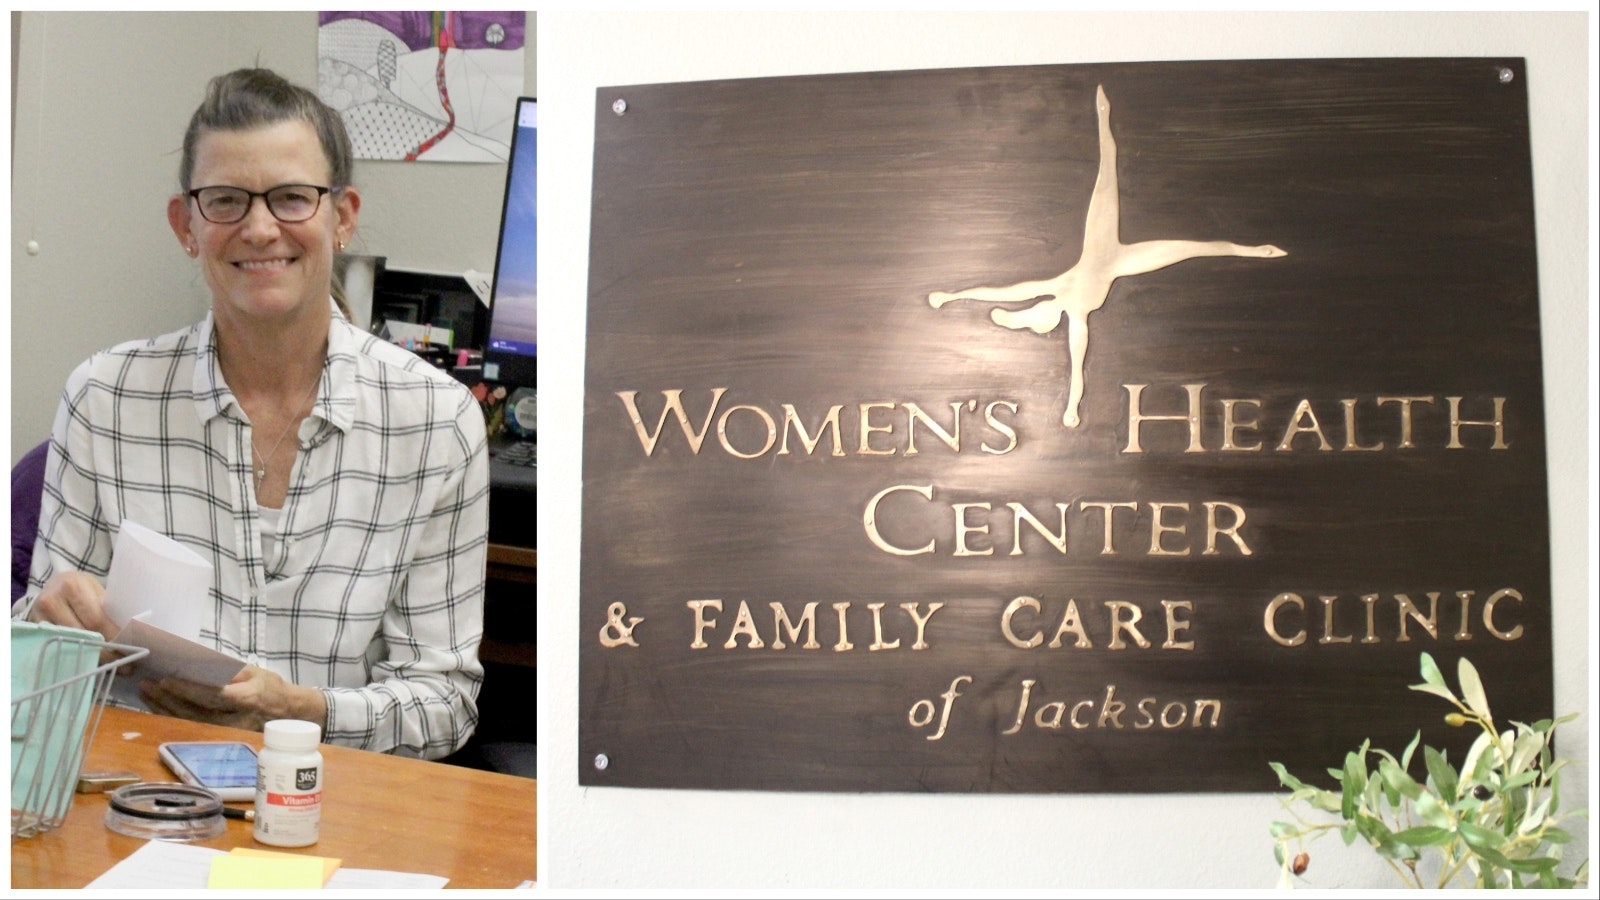 Dr. Giovannina Anthony is an OB-GYN at the Women's Health Center and Family Care Clinic in Jackson. Until less than a month ago, the clinic was the only place in Wyoming women could get an abortion.